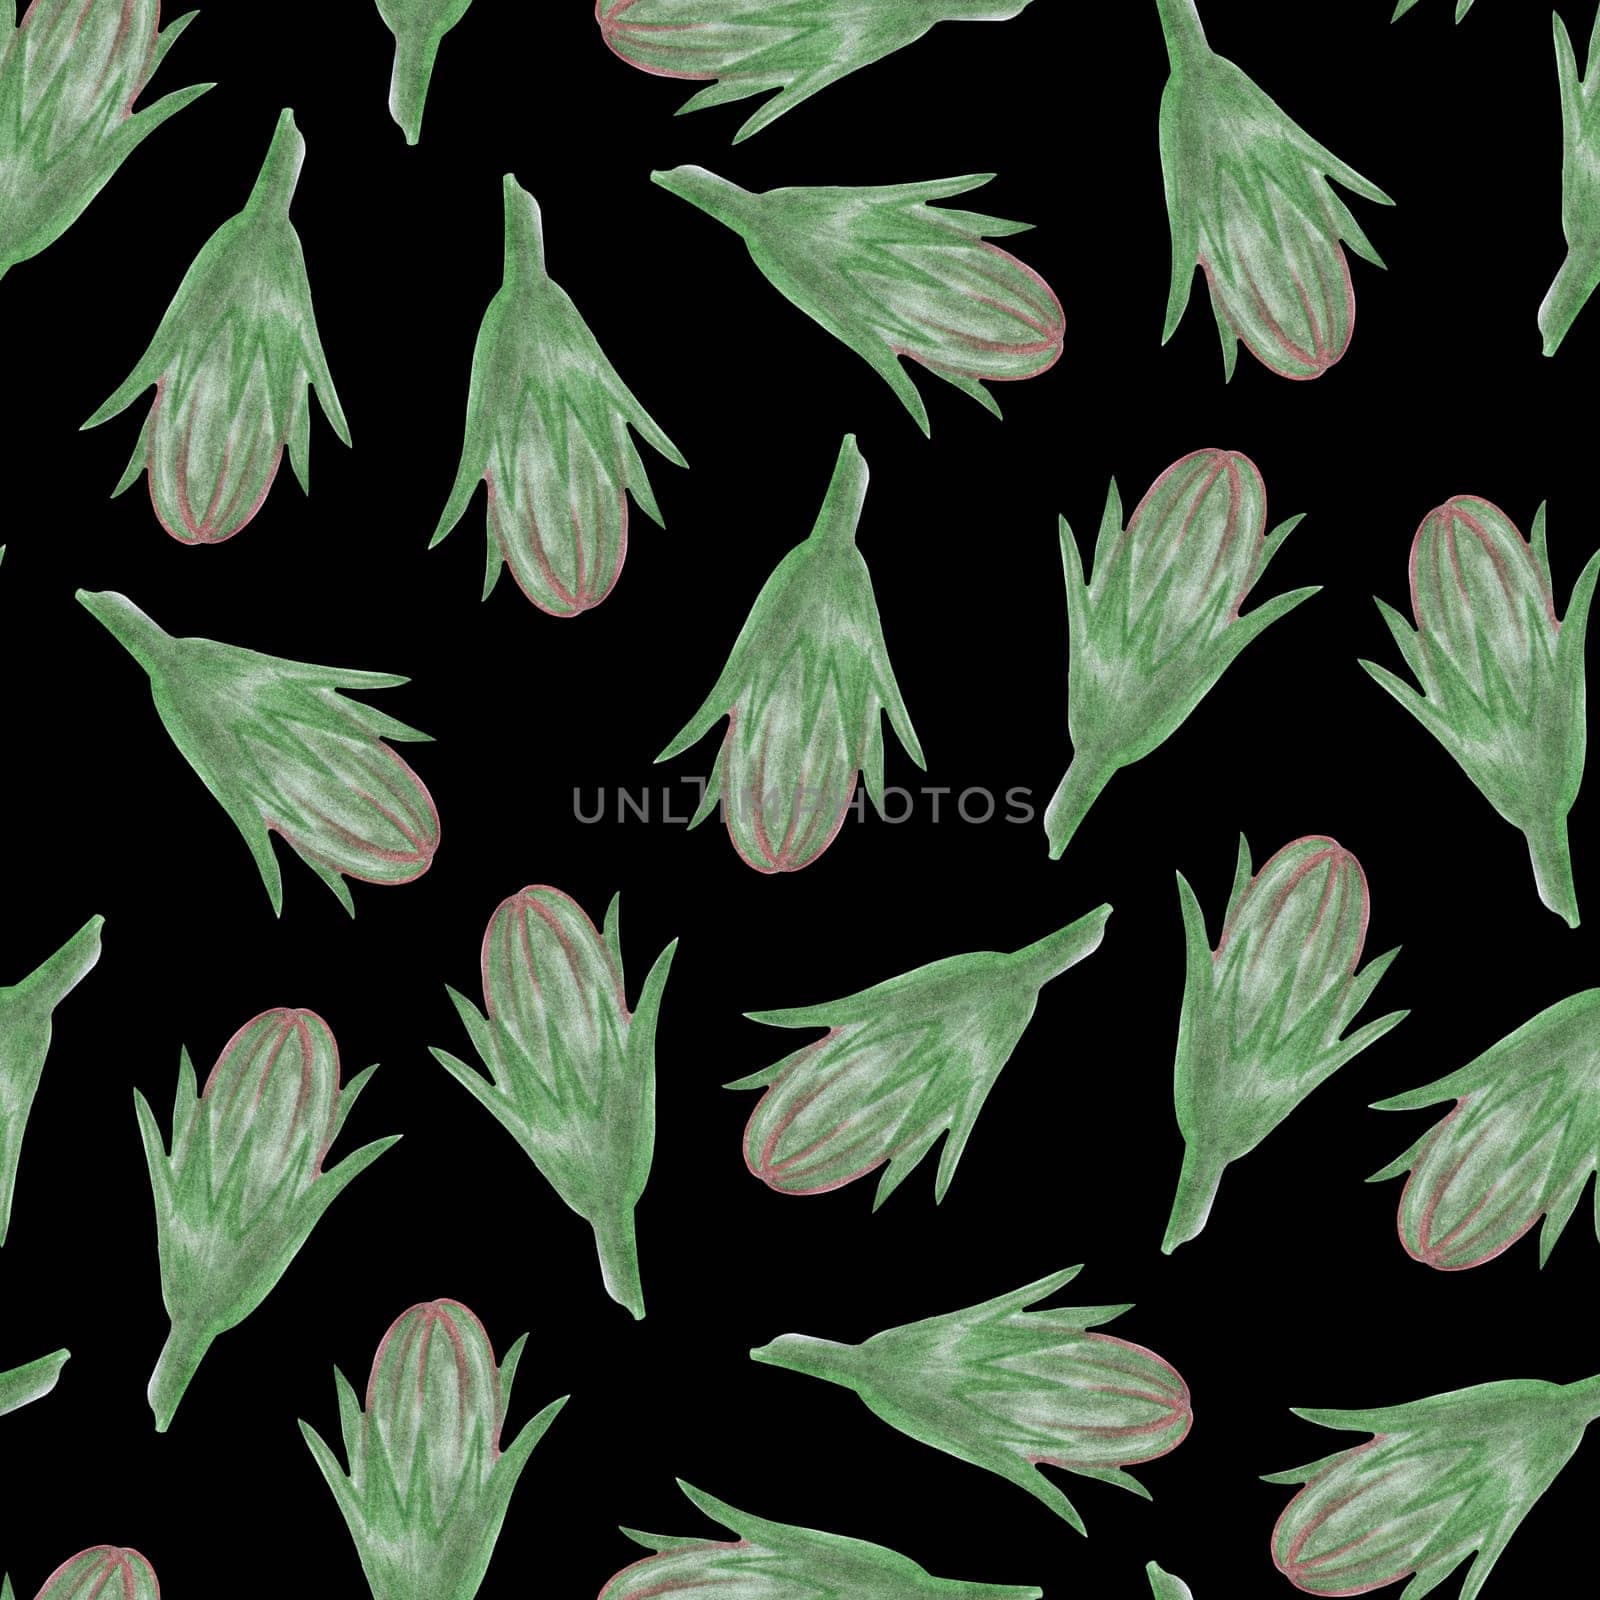 Simple Cornflower Floral Bud Seamless Pattern on a Black Background. Hand Drawn Simple Cornflower Bud Digital Paper. Wild Meadow Flowers Drawn by Colored Pencils.